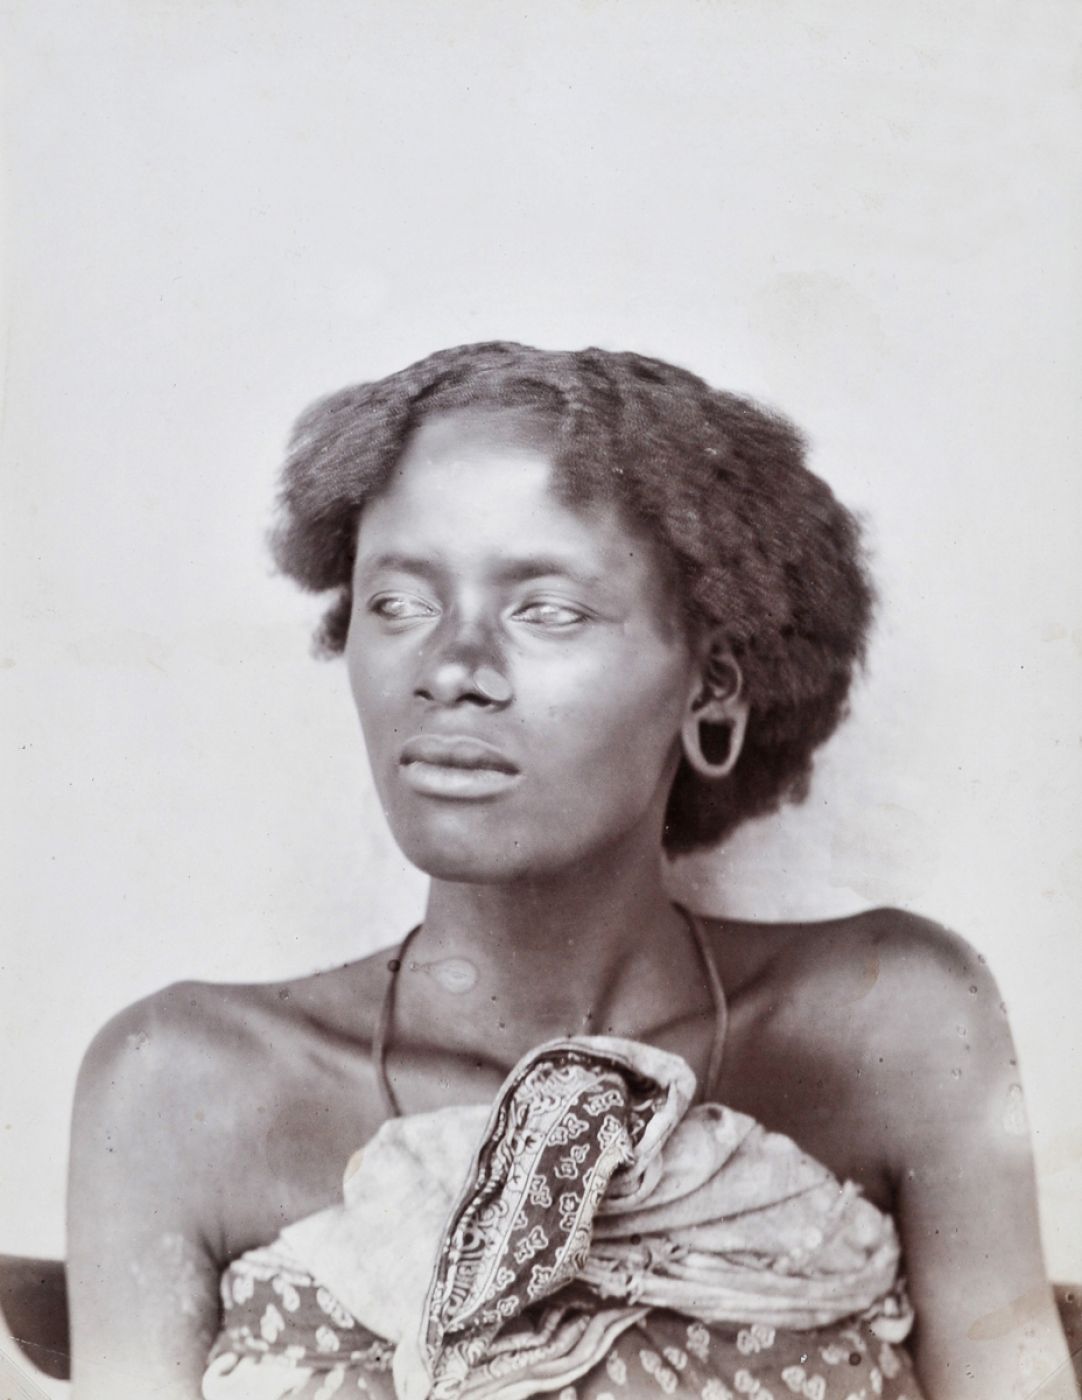 Anonymous, “Portrait of a Malagasy woman”, 1900 ca.